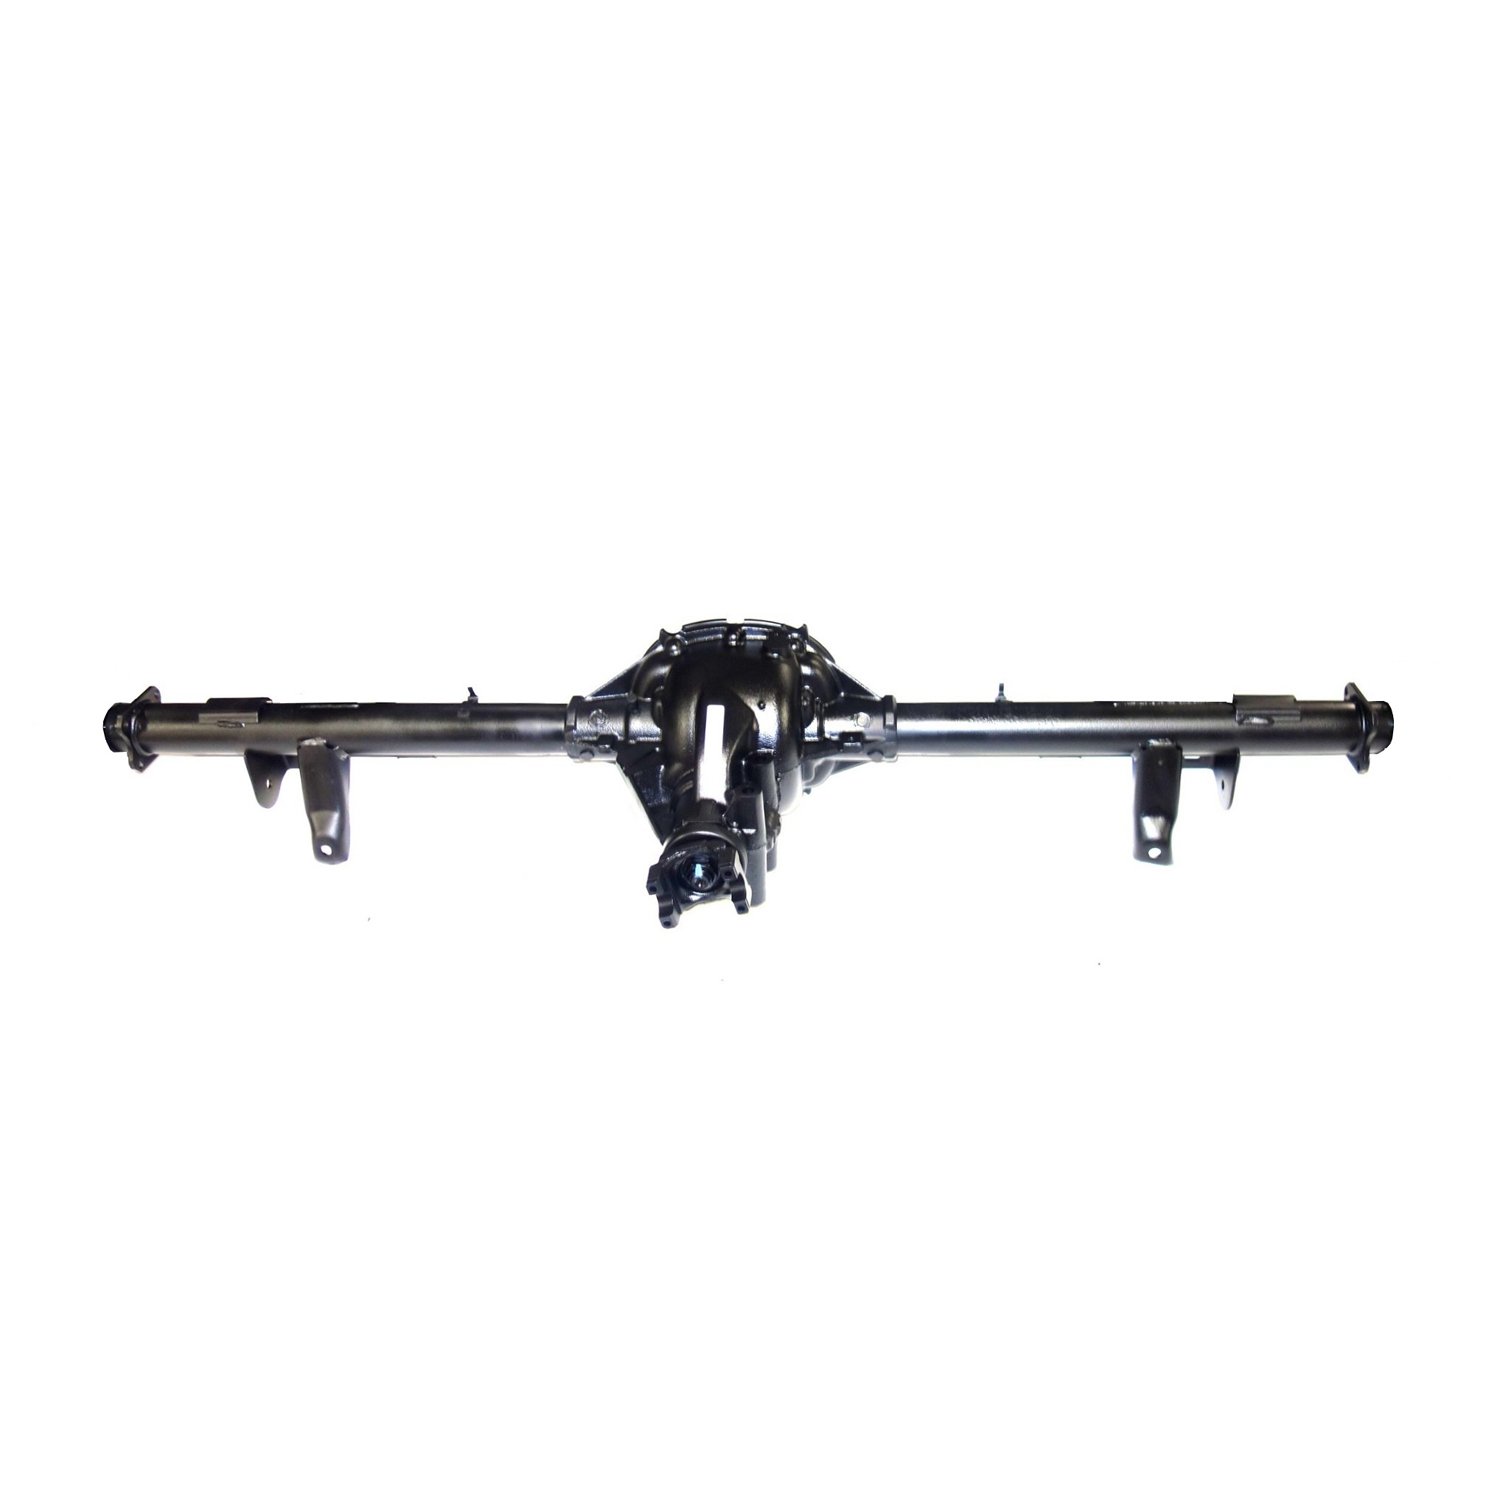 Remanufactured Axle Assy for GM 7.5" 95-97 S10 Blazer & S15 Jimmy, 3.08 , 2wd, Posi LSD